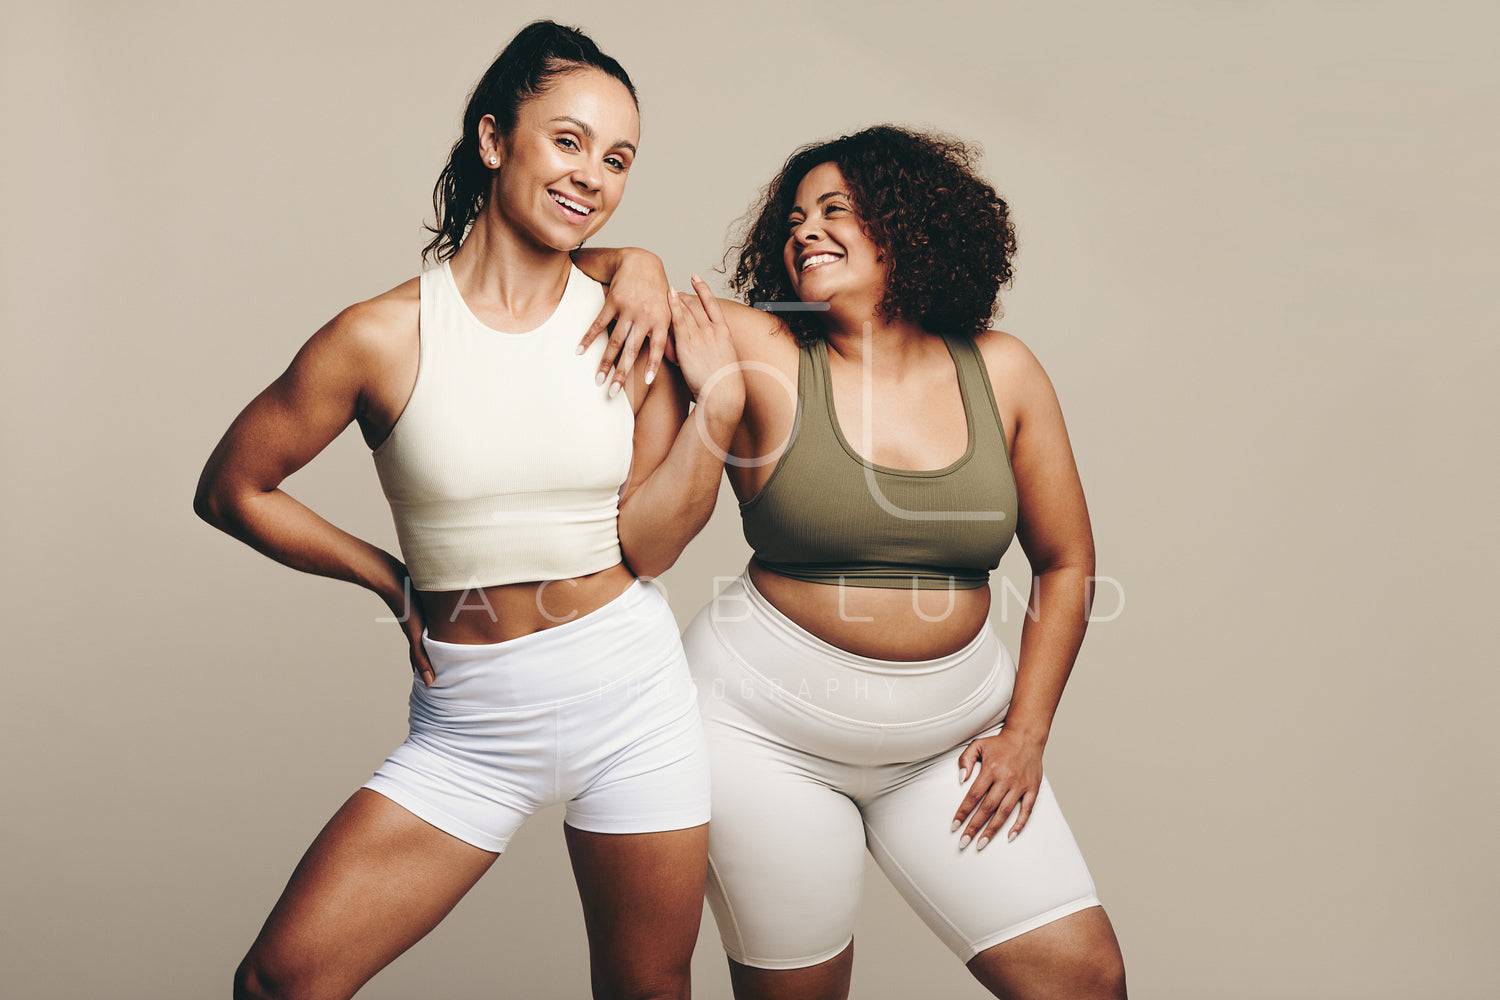 Athletic and proud, two female friends stand in gym wear showing their fit  bodies